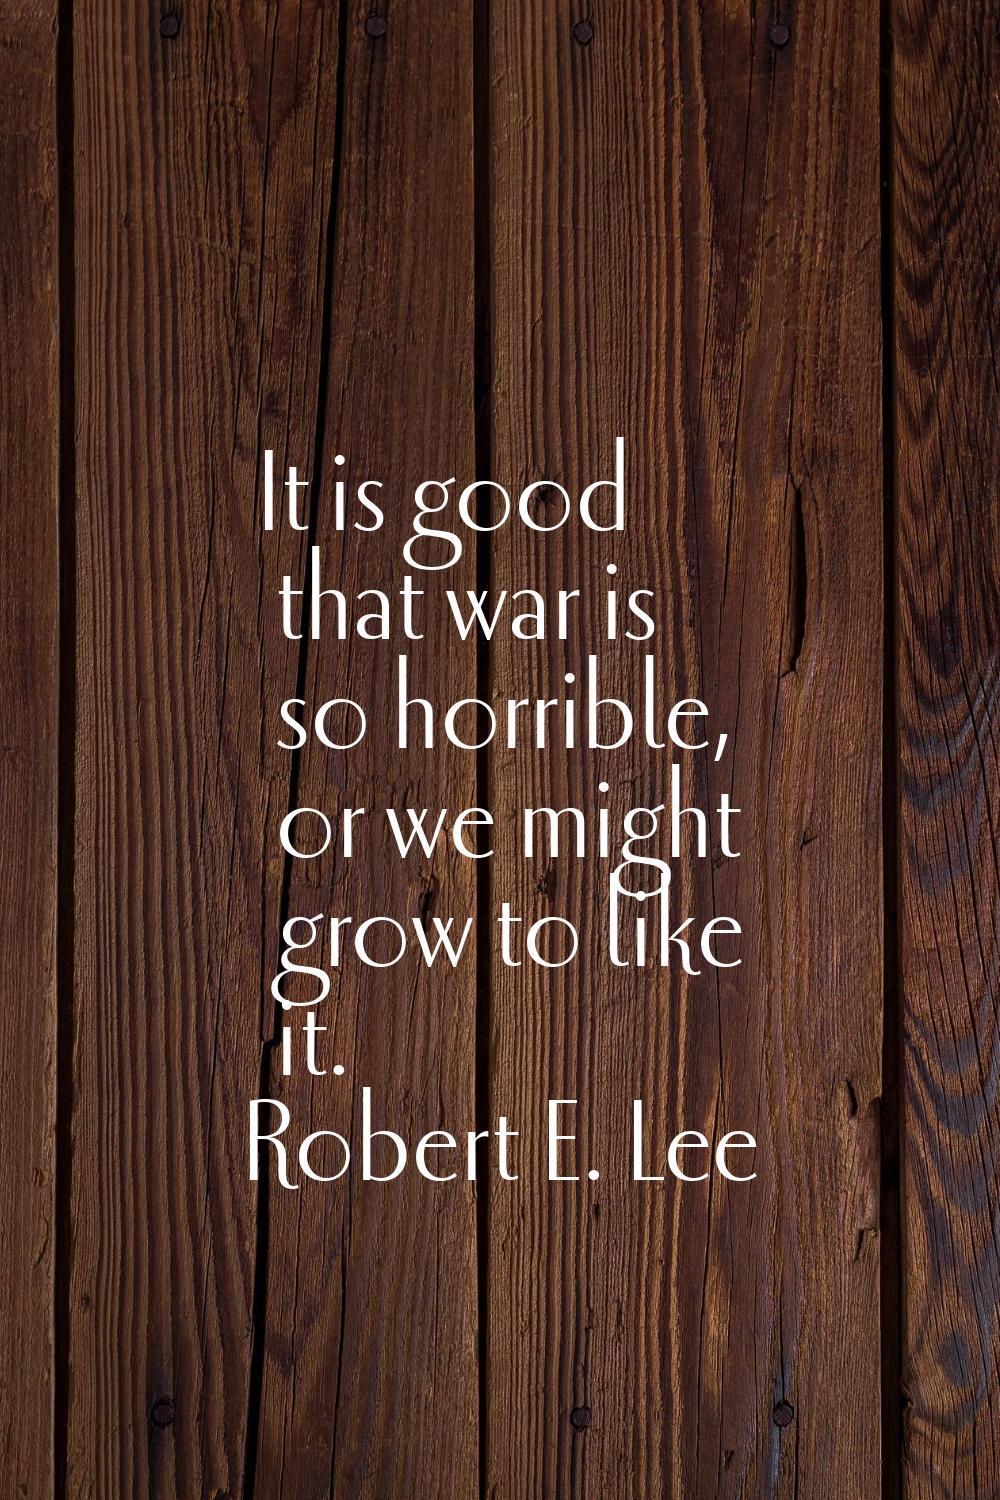 It is good that war is so horrible, or we might grow to like it.